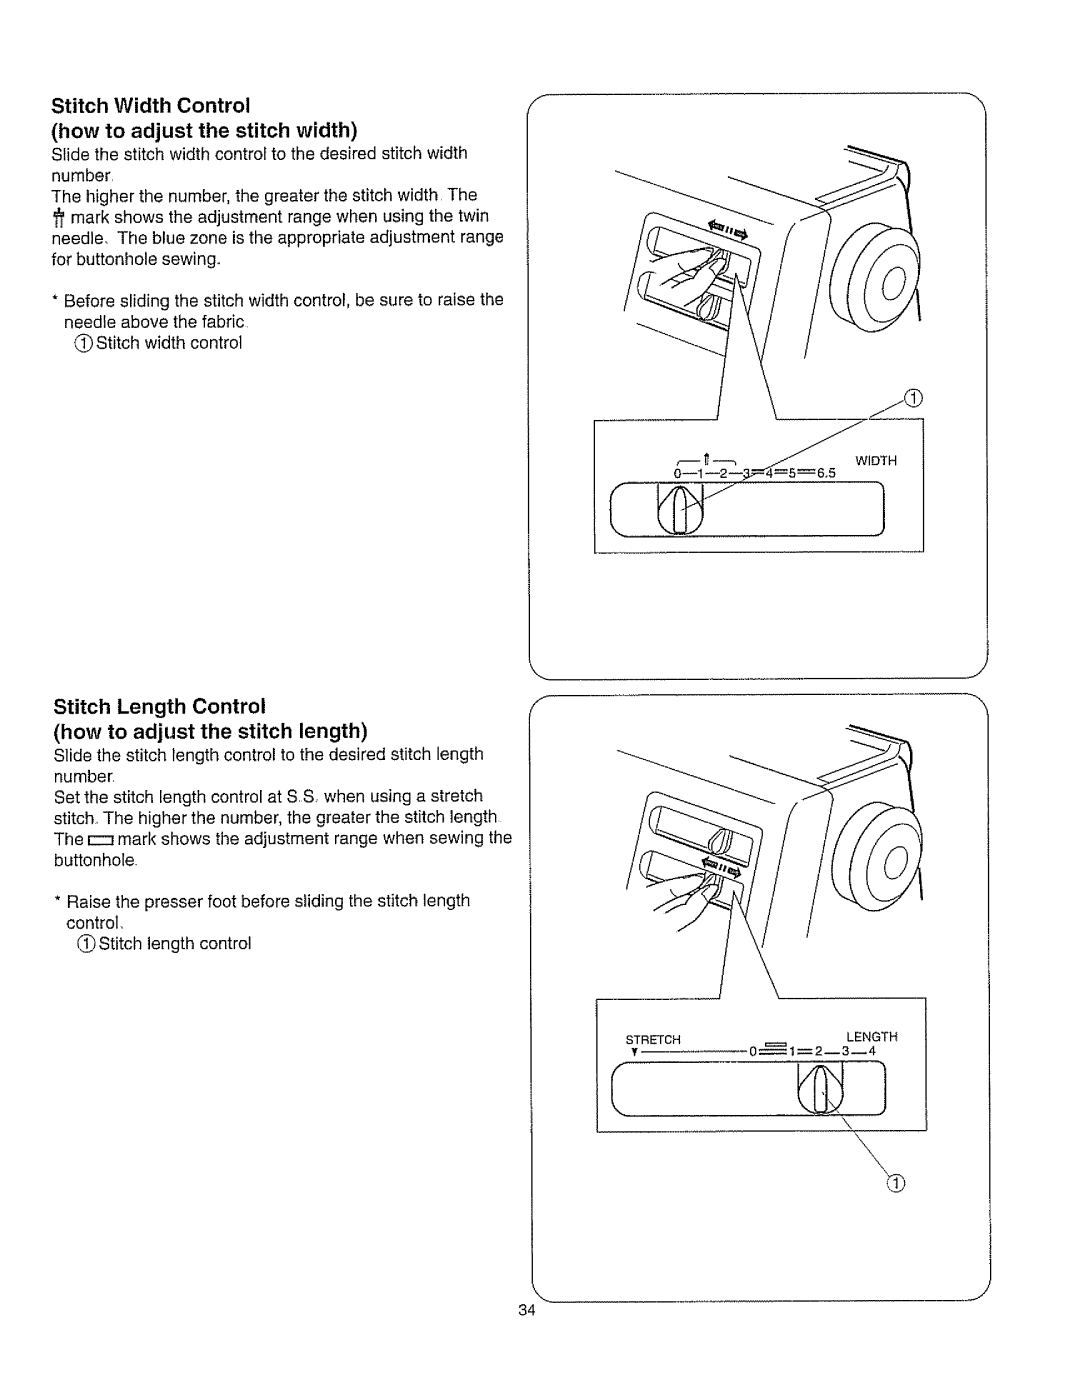 Kenmore 385.162213 owner manual Stitch Width Control how to adjust the stitch width, Stitch Length Control 